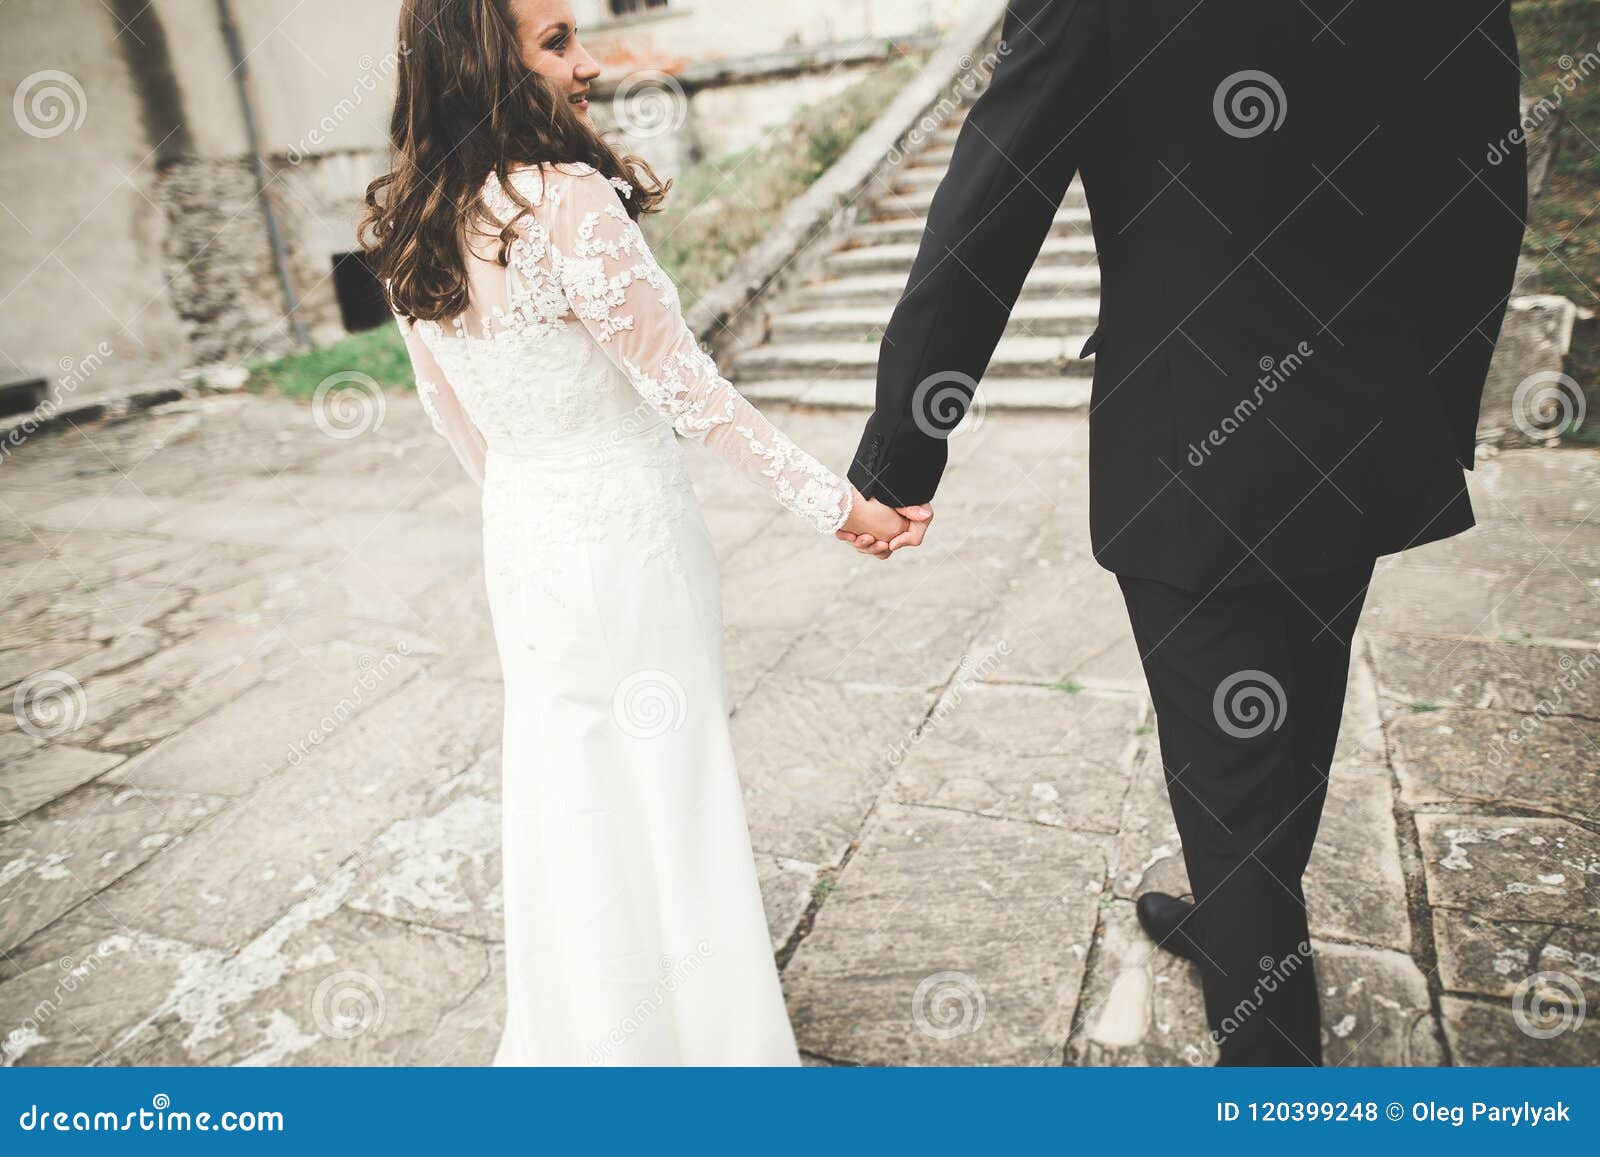 https://thumbs.dreamstime.com/z/sensual-married-couple-valentines-hugging-front-old-slavic-castle-sensual-married-couple-valentines-hugging-front-old-120399248.jpg